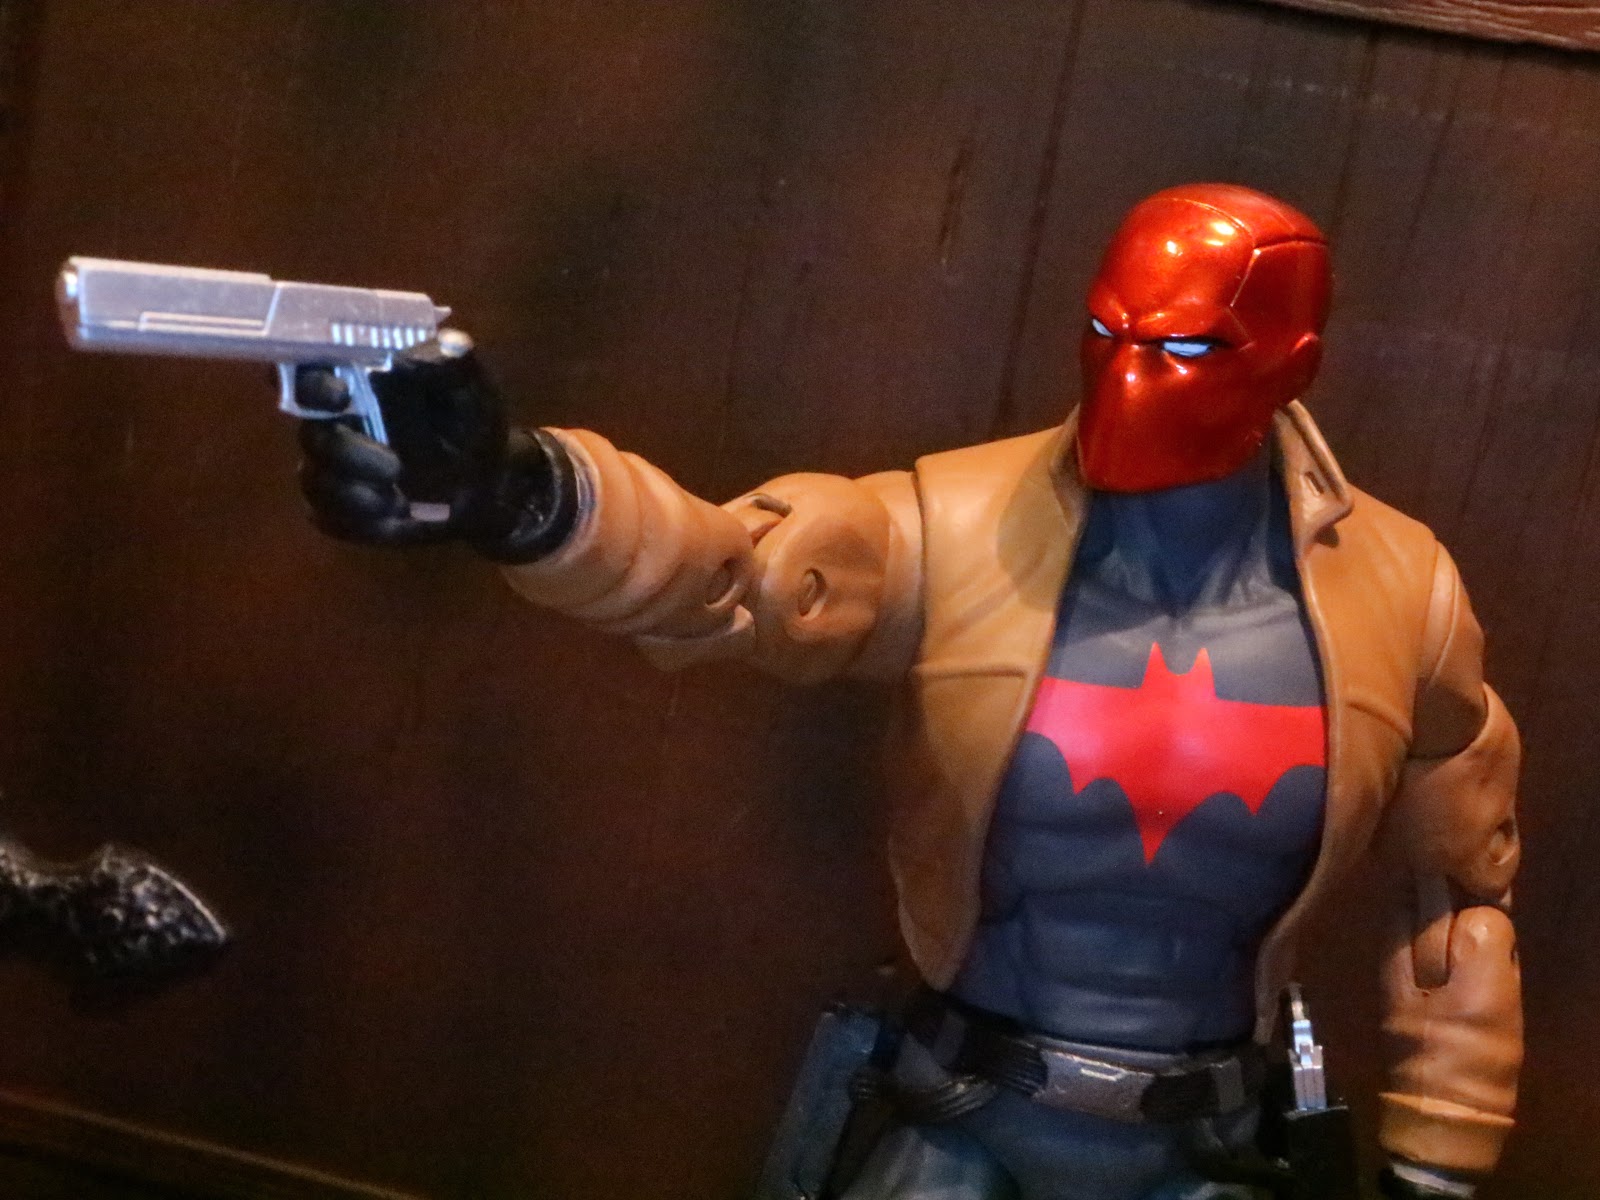 red hood collectibles